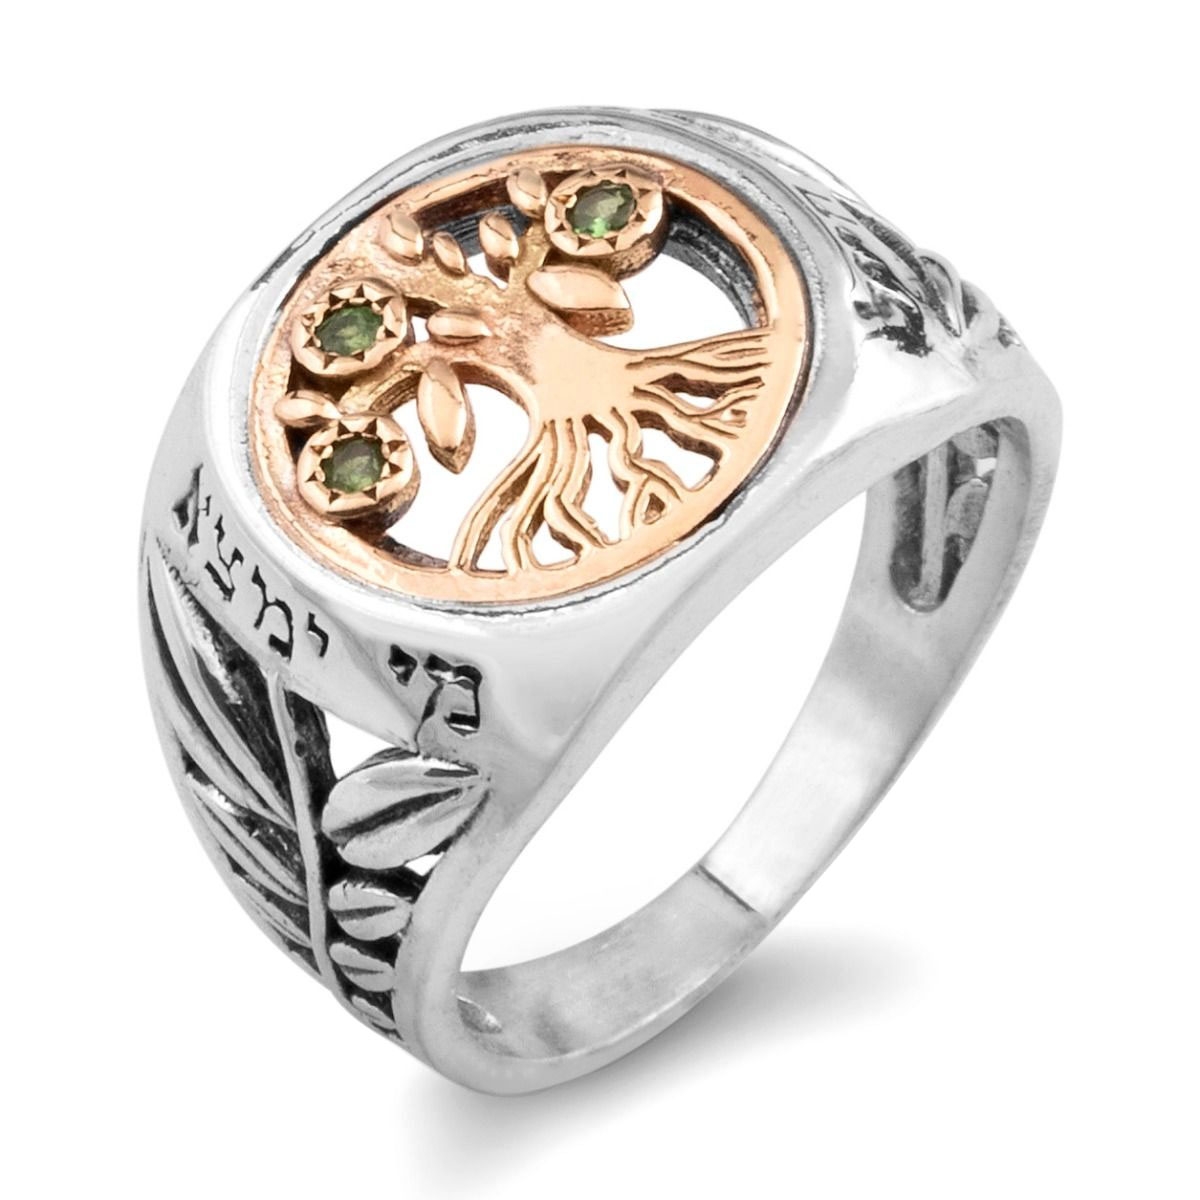 Sterling Silver and 9K Gold Tree of Life "Hillel Ring" with Emerald Stones and Eshet Chayil (Woman of Valor) Engraving - 1